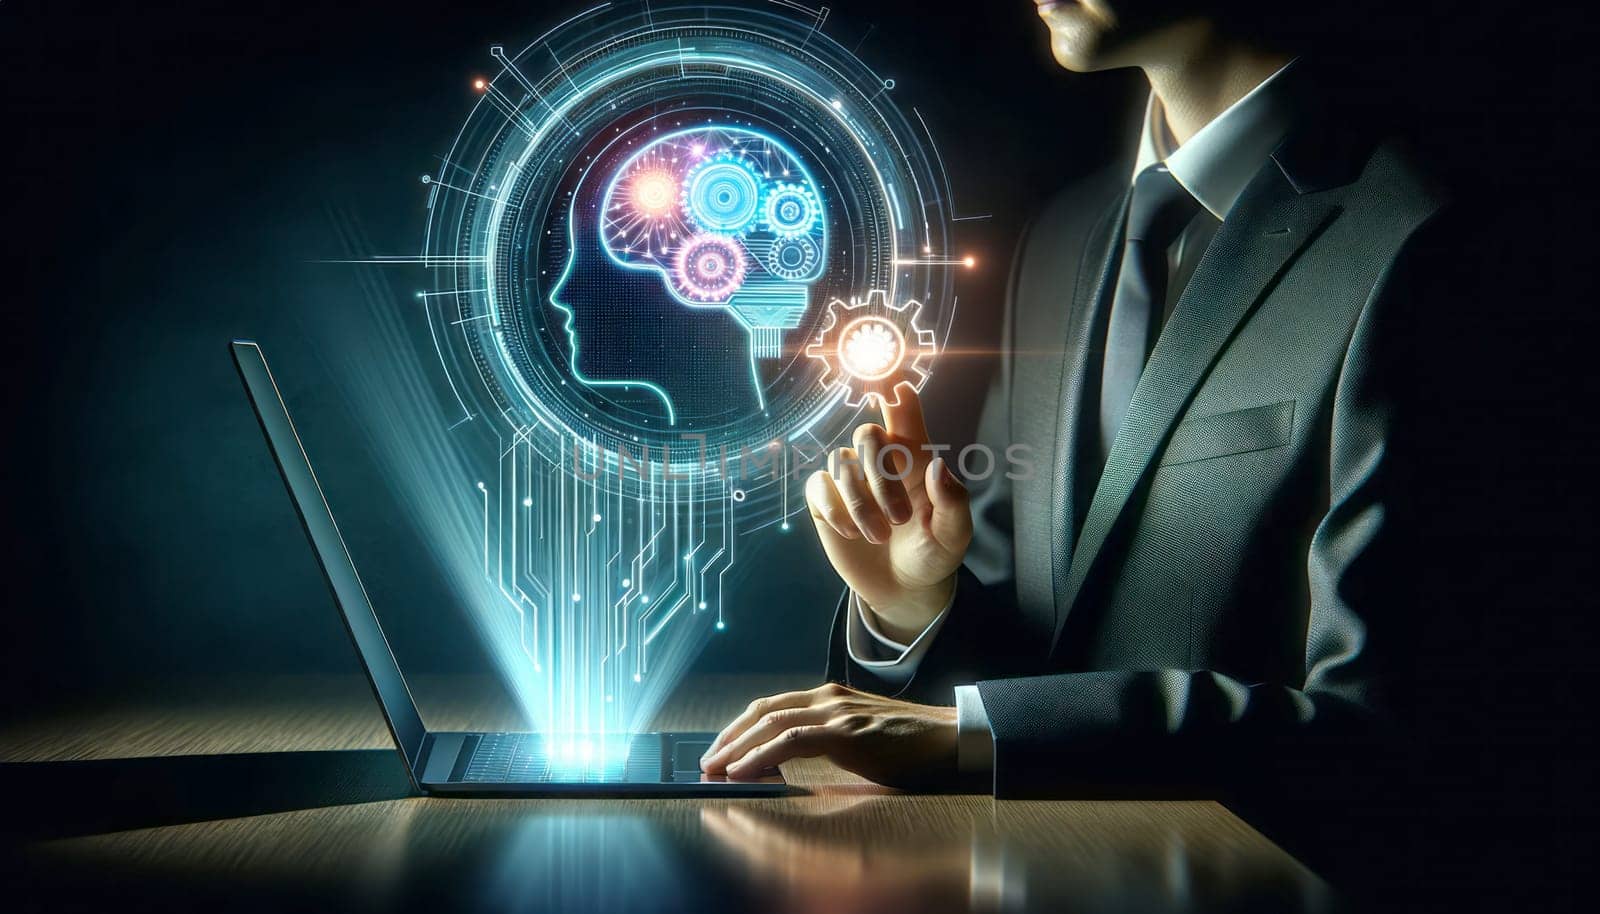 A digital illustration of a person in business attire interacting with a futuristic holographic interface. The interface displays a glowing, neon-like brain connected to a gear symbol, representing artificial intelligence or machine learning. The person is not directly visible, only their hand is shown gesturing towards the holographic display. The hologram is the focal point and it emits a soft glow that illuminates the person's hand and reflects off the laptop in the foreground. The color palette is dark with the hologram providing bright neon contrasts. The overall tone is sleek and modern, suggesting advanced technology in a corporate or research setting.